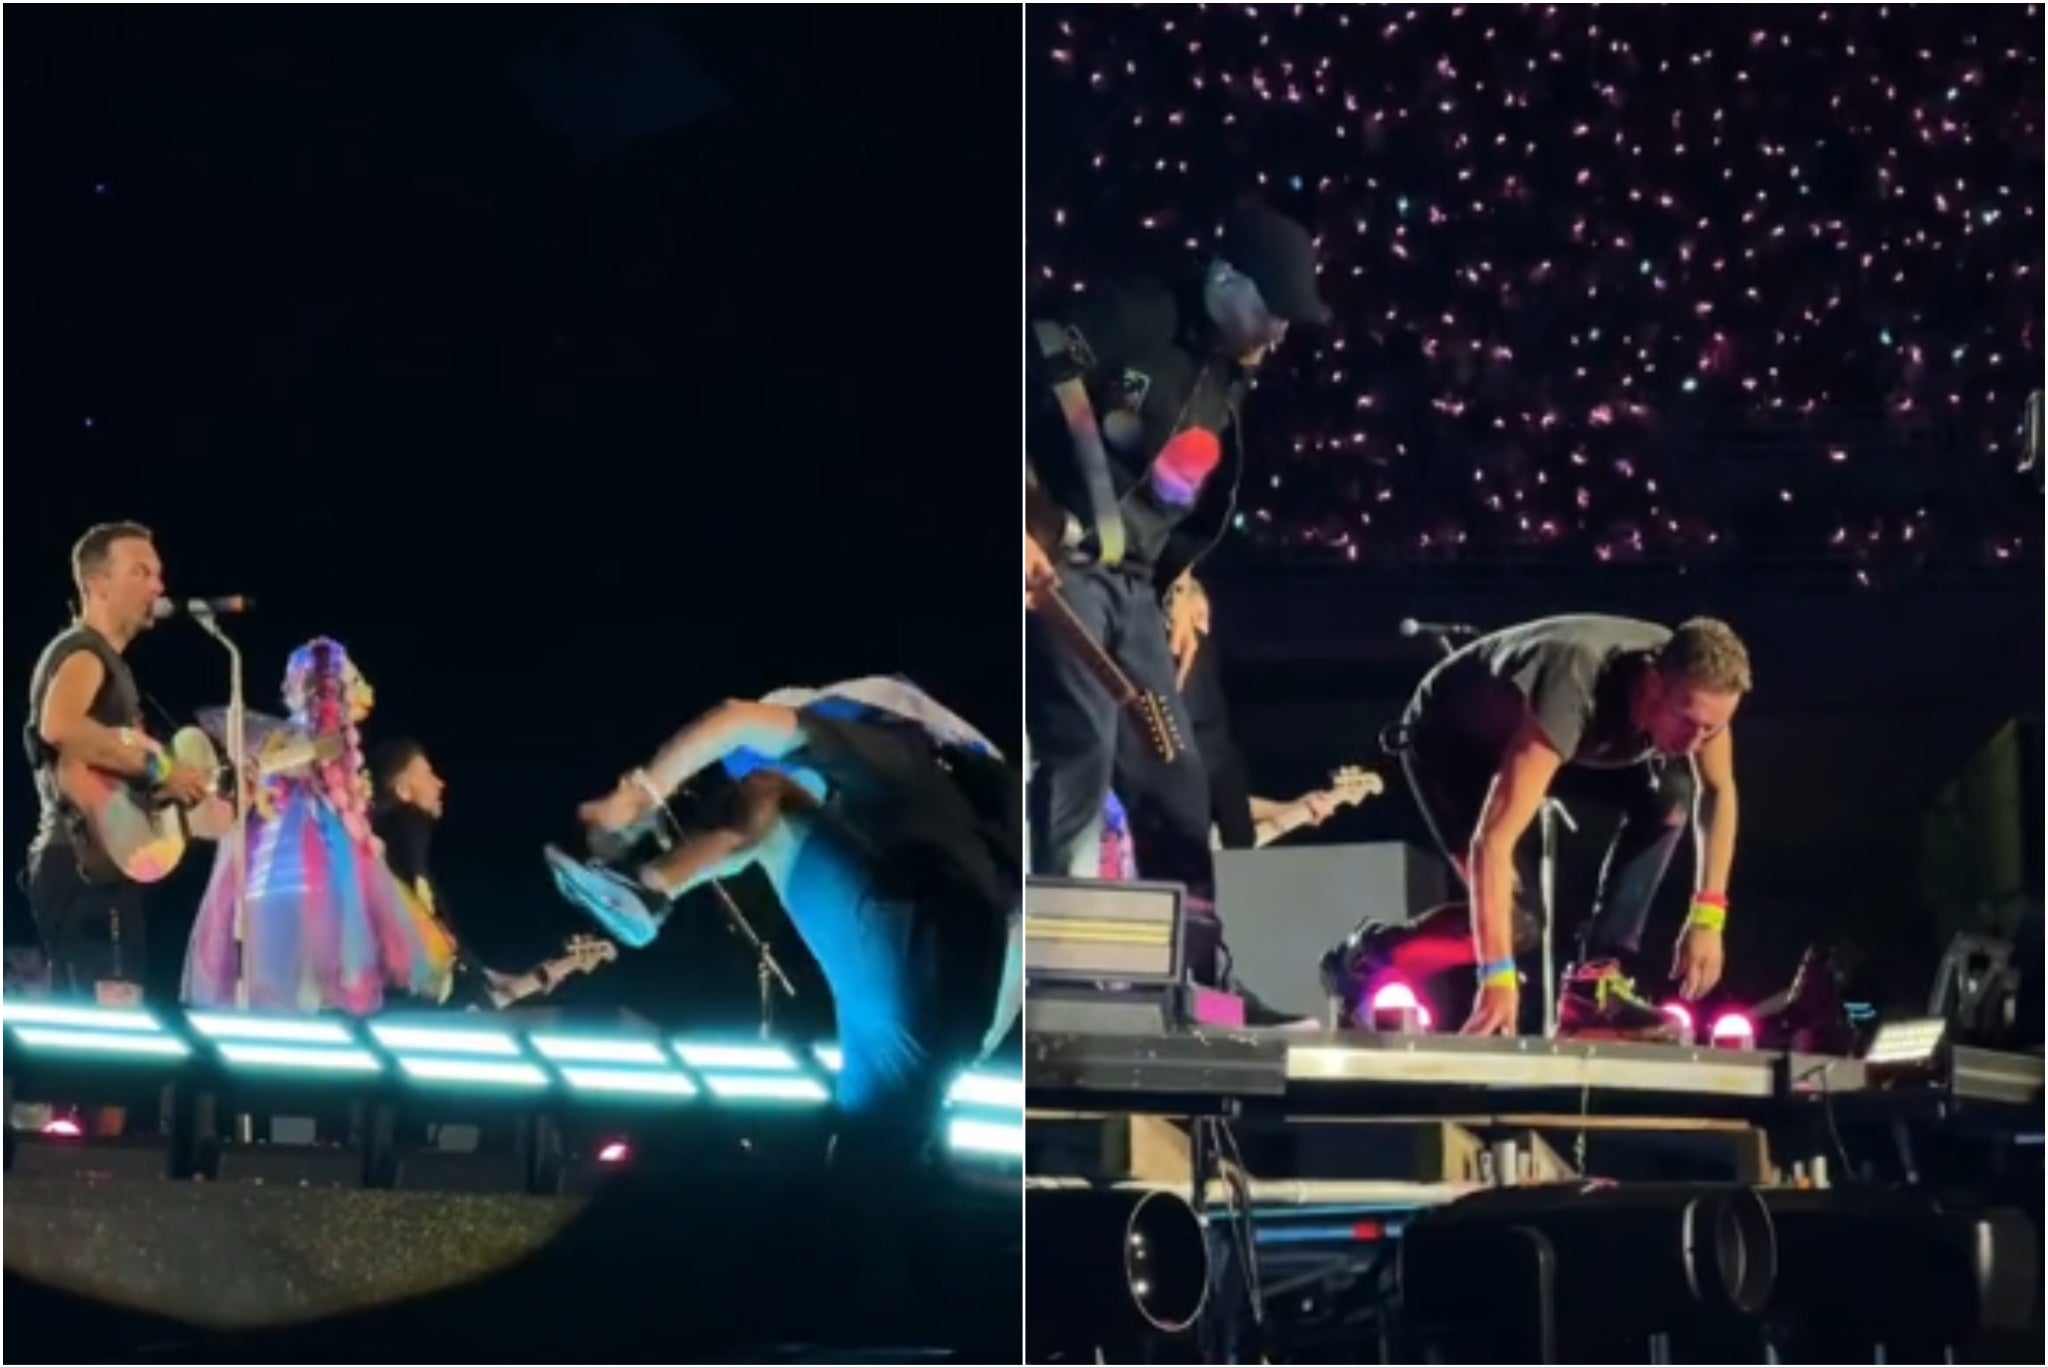 A man attempts to climb onto the stage during Coldplay’s gig in Athens, Greece